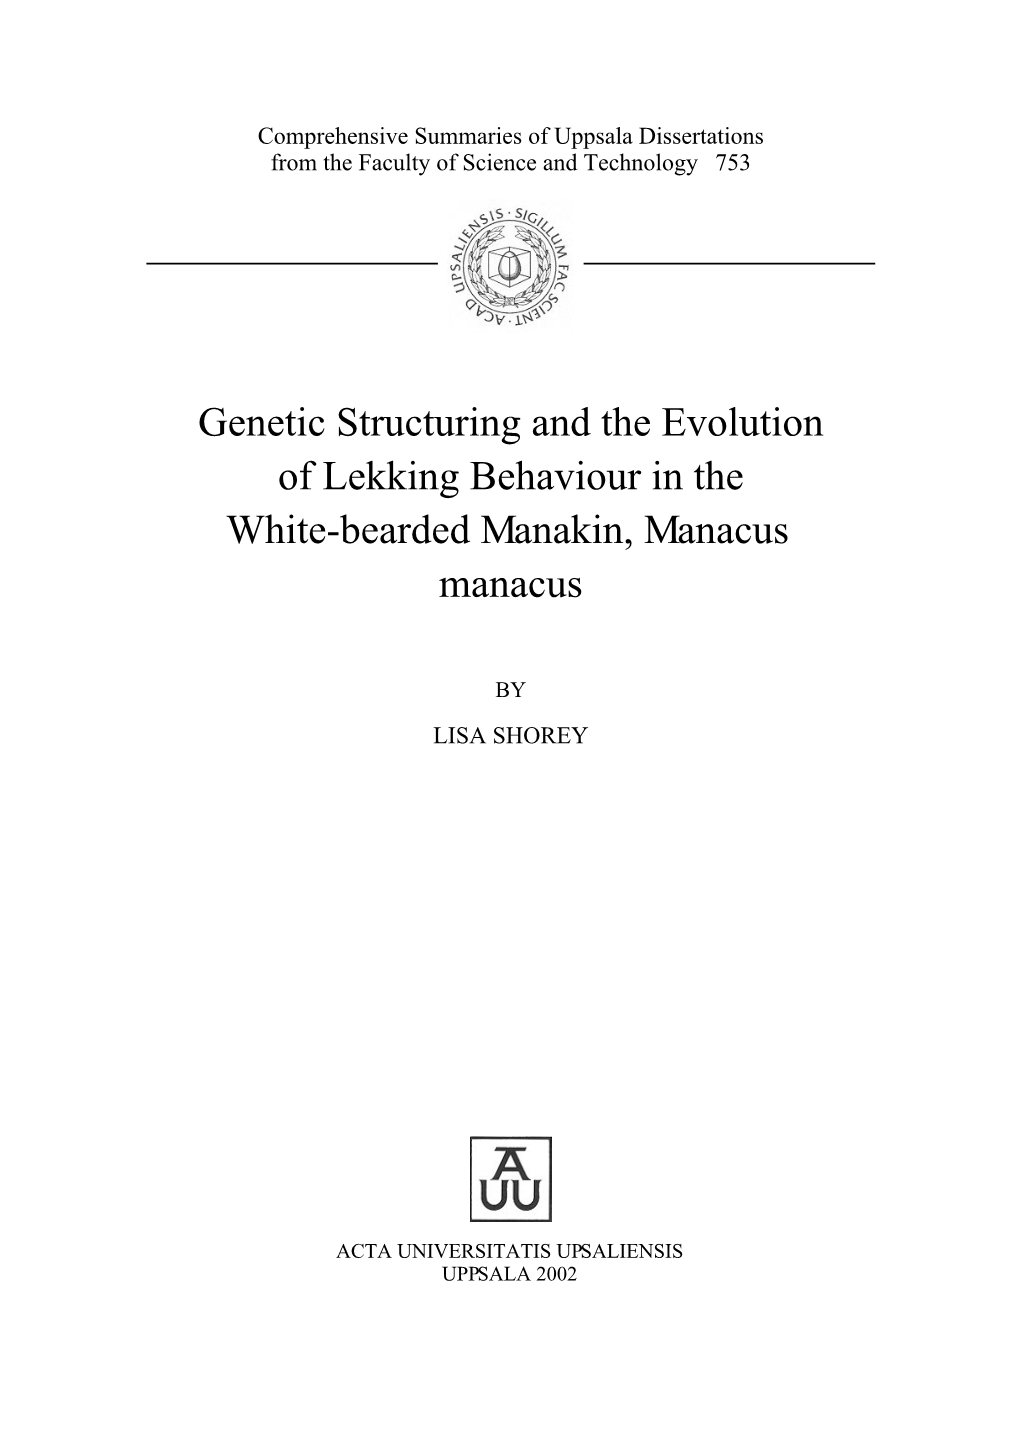 Genetic Structuring and the Evolution of Lekking Behaviour in the White-Bearded Manakin, Manacus Manacus